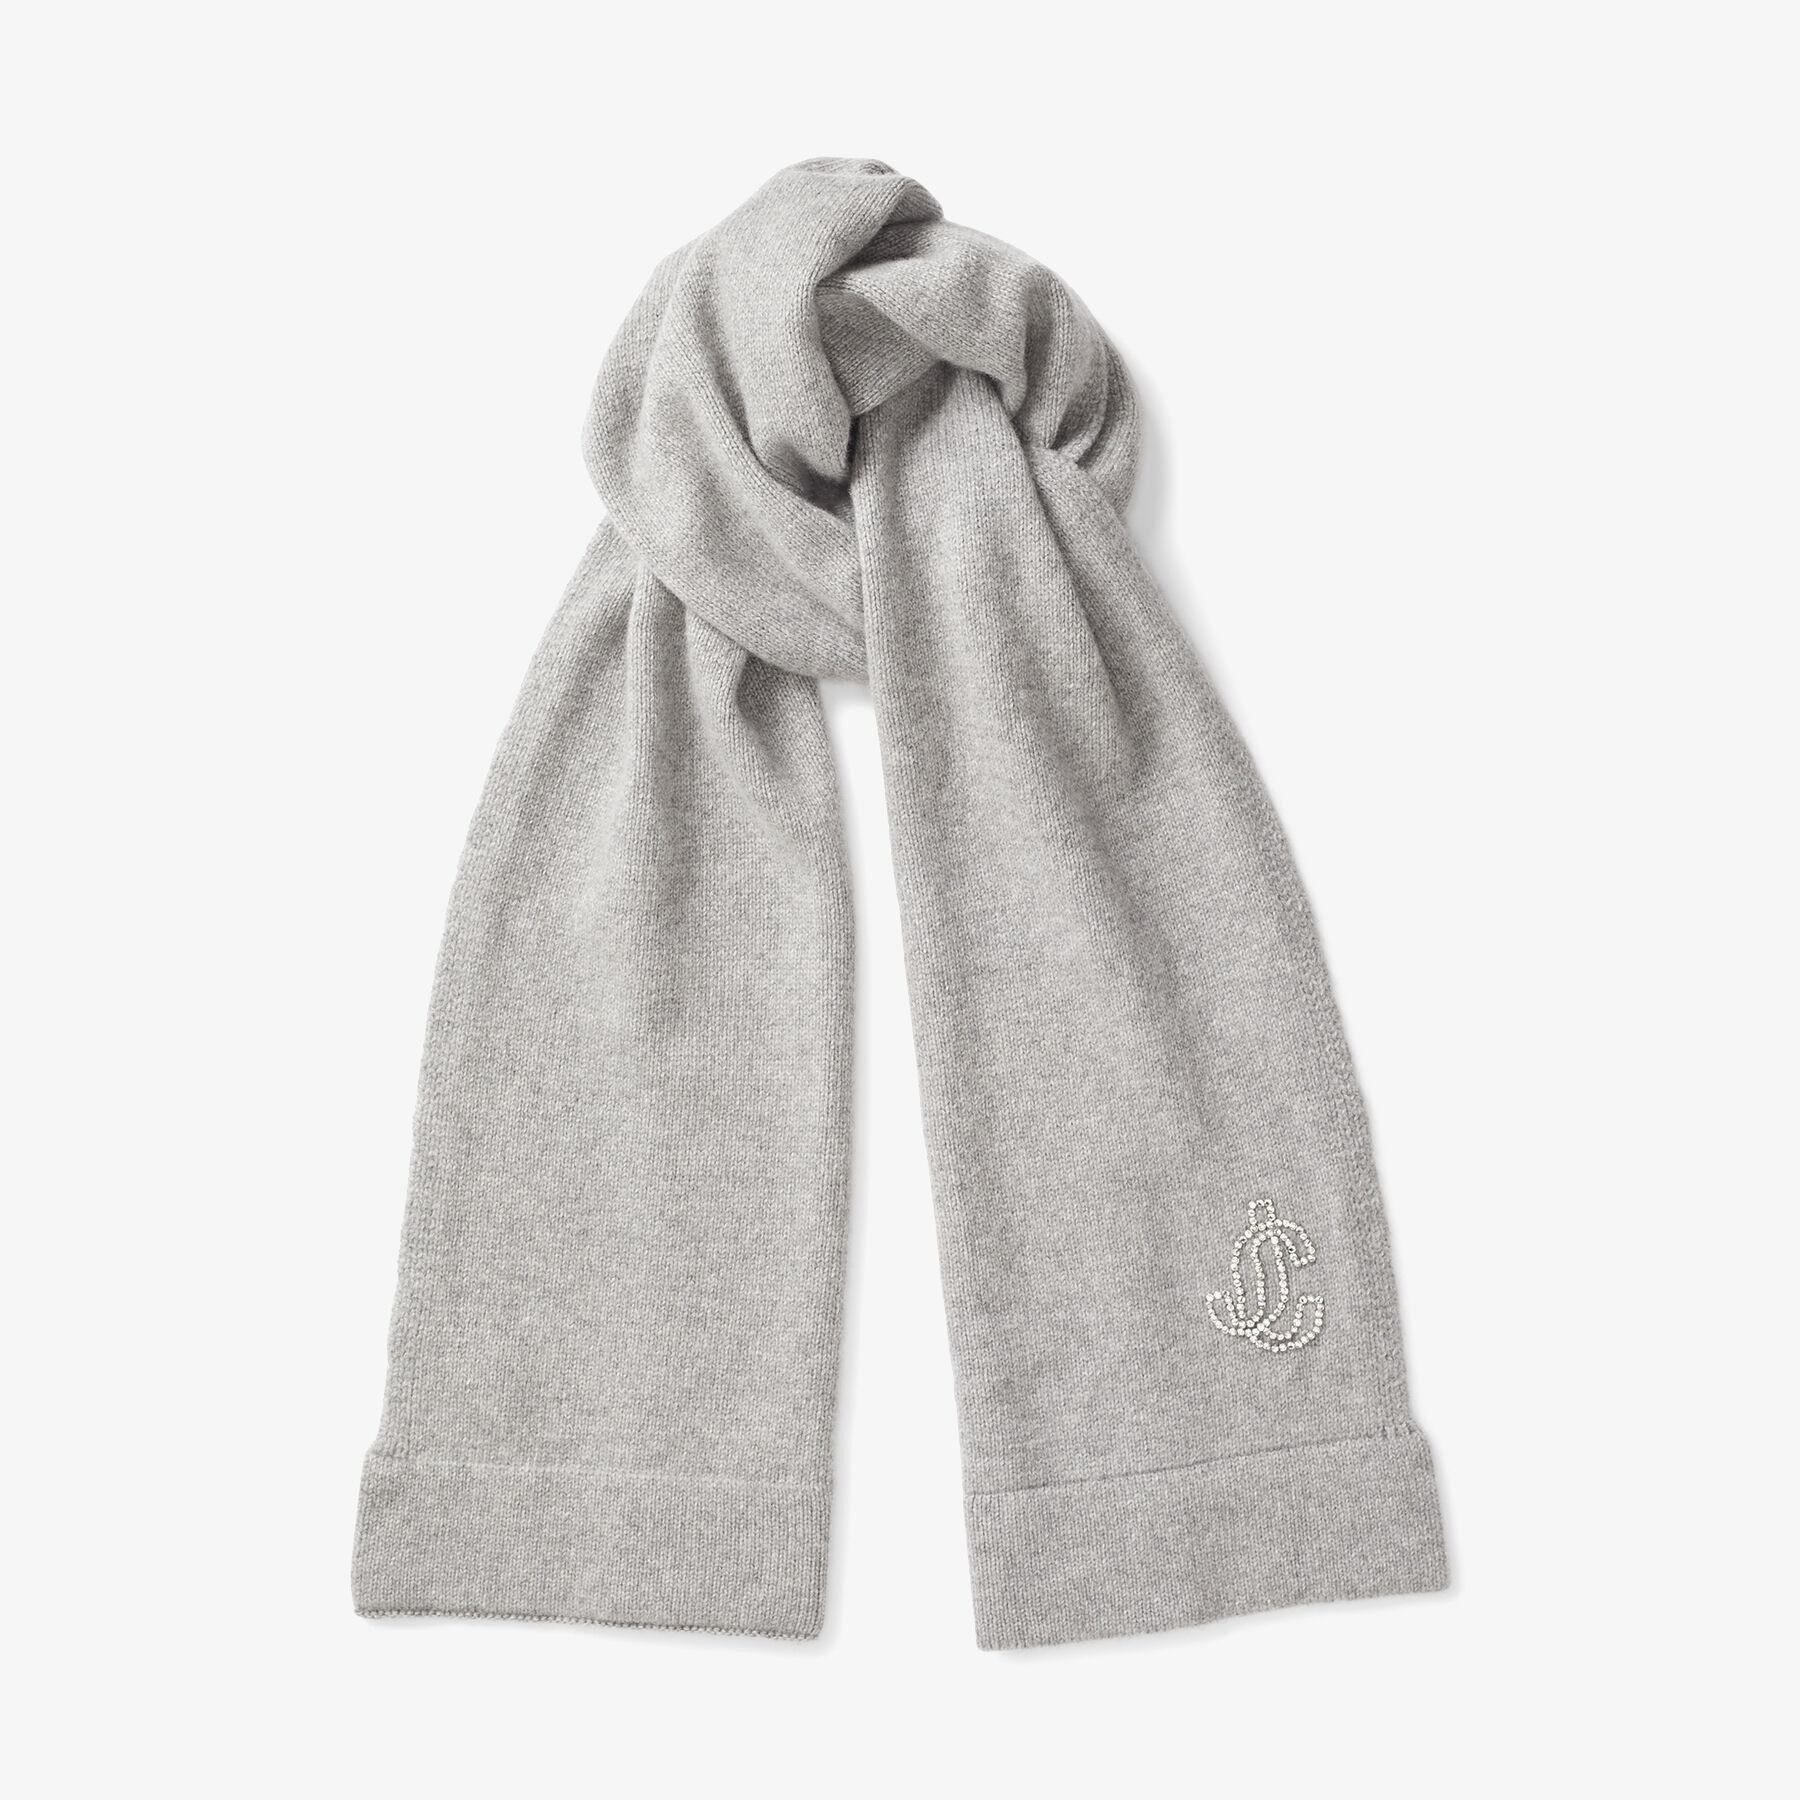 Imke
Marl Grey Knitted Cashmere Scarf with Embroidered Crystal JC Monogram - 1